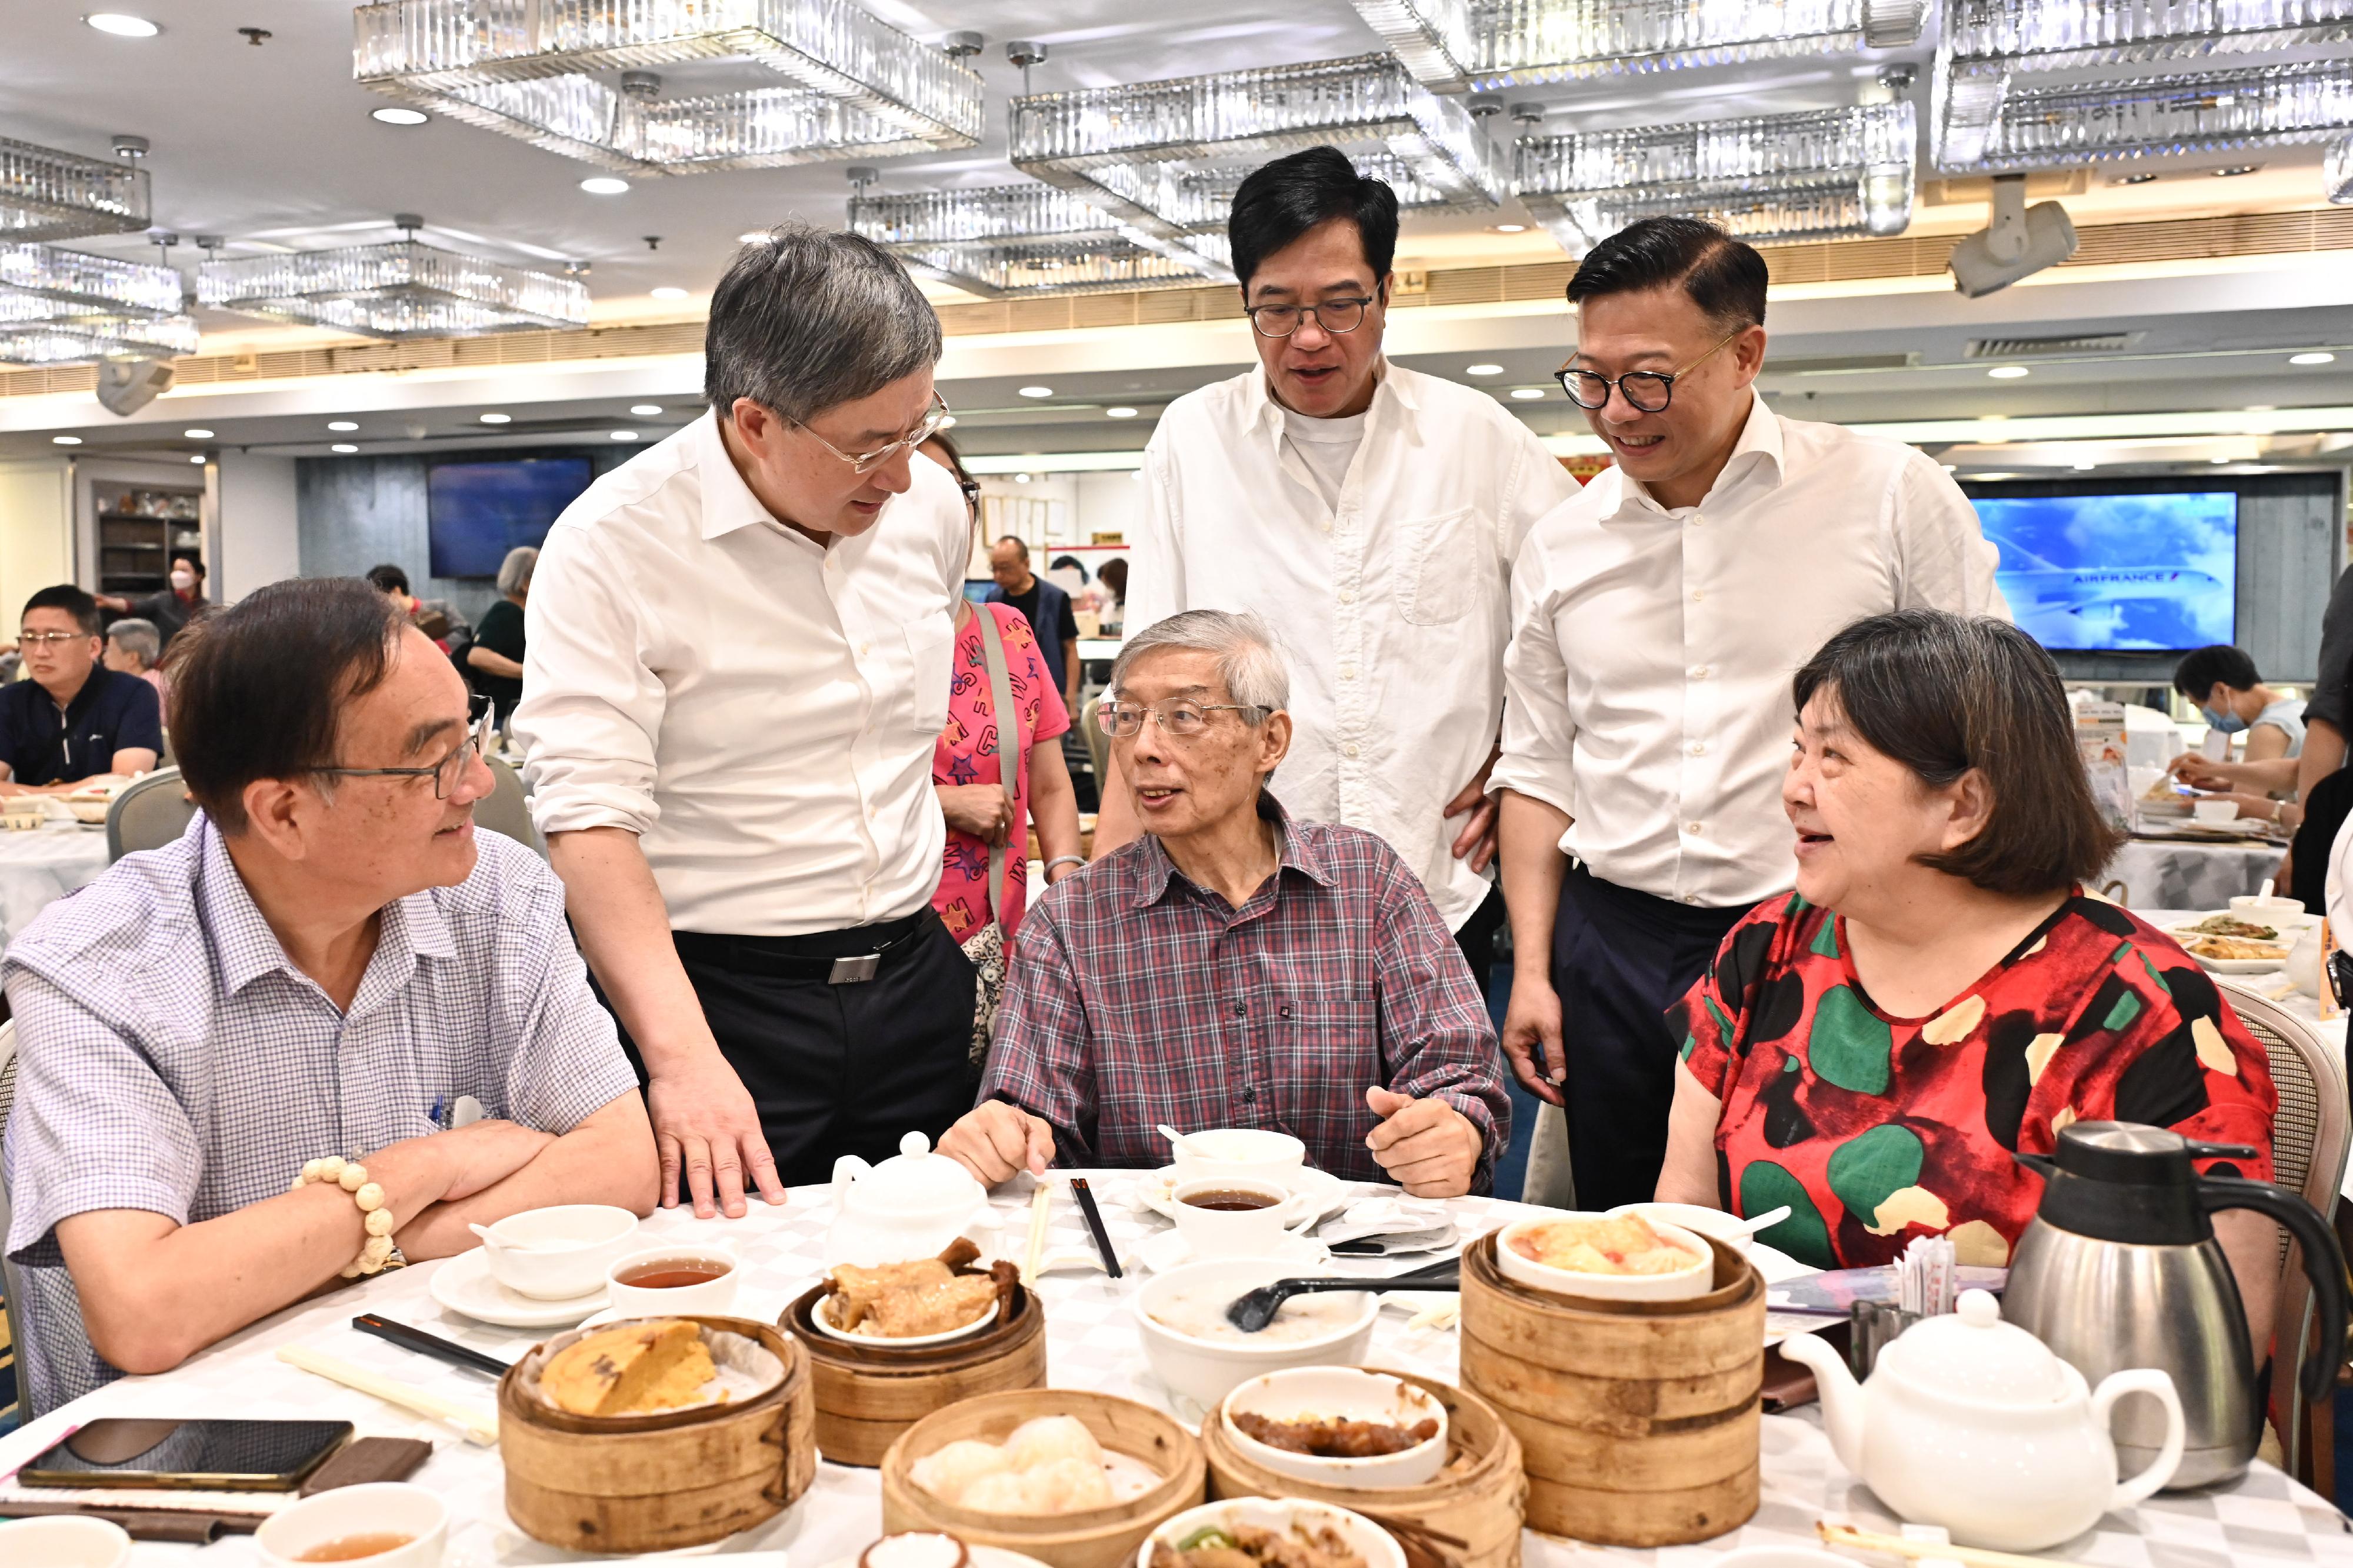 The Deputy Chief Secretary for Administration, Mr Cheuk Wing-hing (back row, left); the Deputy Financial Secretary, Mr Michael Wong (back row, centre); and the Deputy Secretary for Justice, Mr Cheung Kwok-kwan (back row, right), are glad to learn that members of the public welcome the special offers in celebration of Hong Kong's return to the motherland at a North Point restaurant today (July 1).
